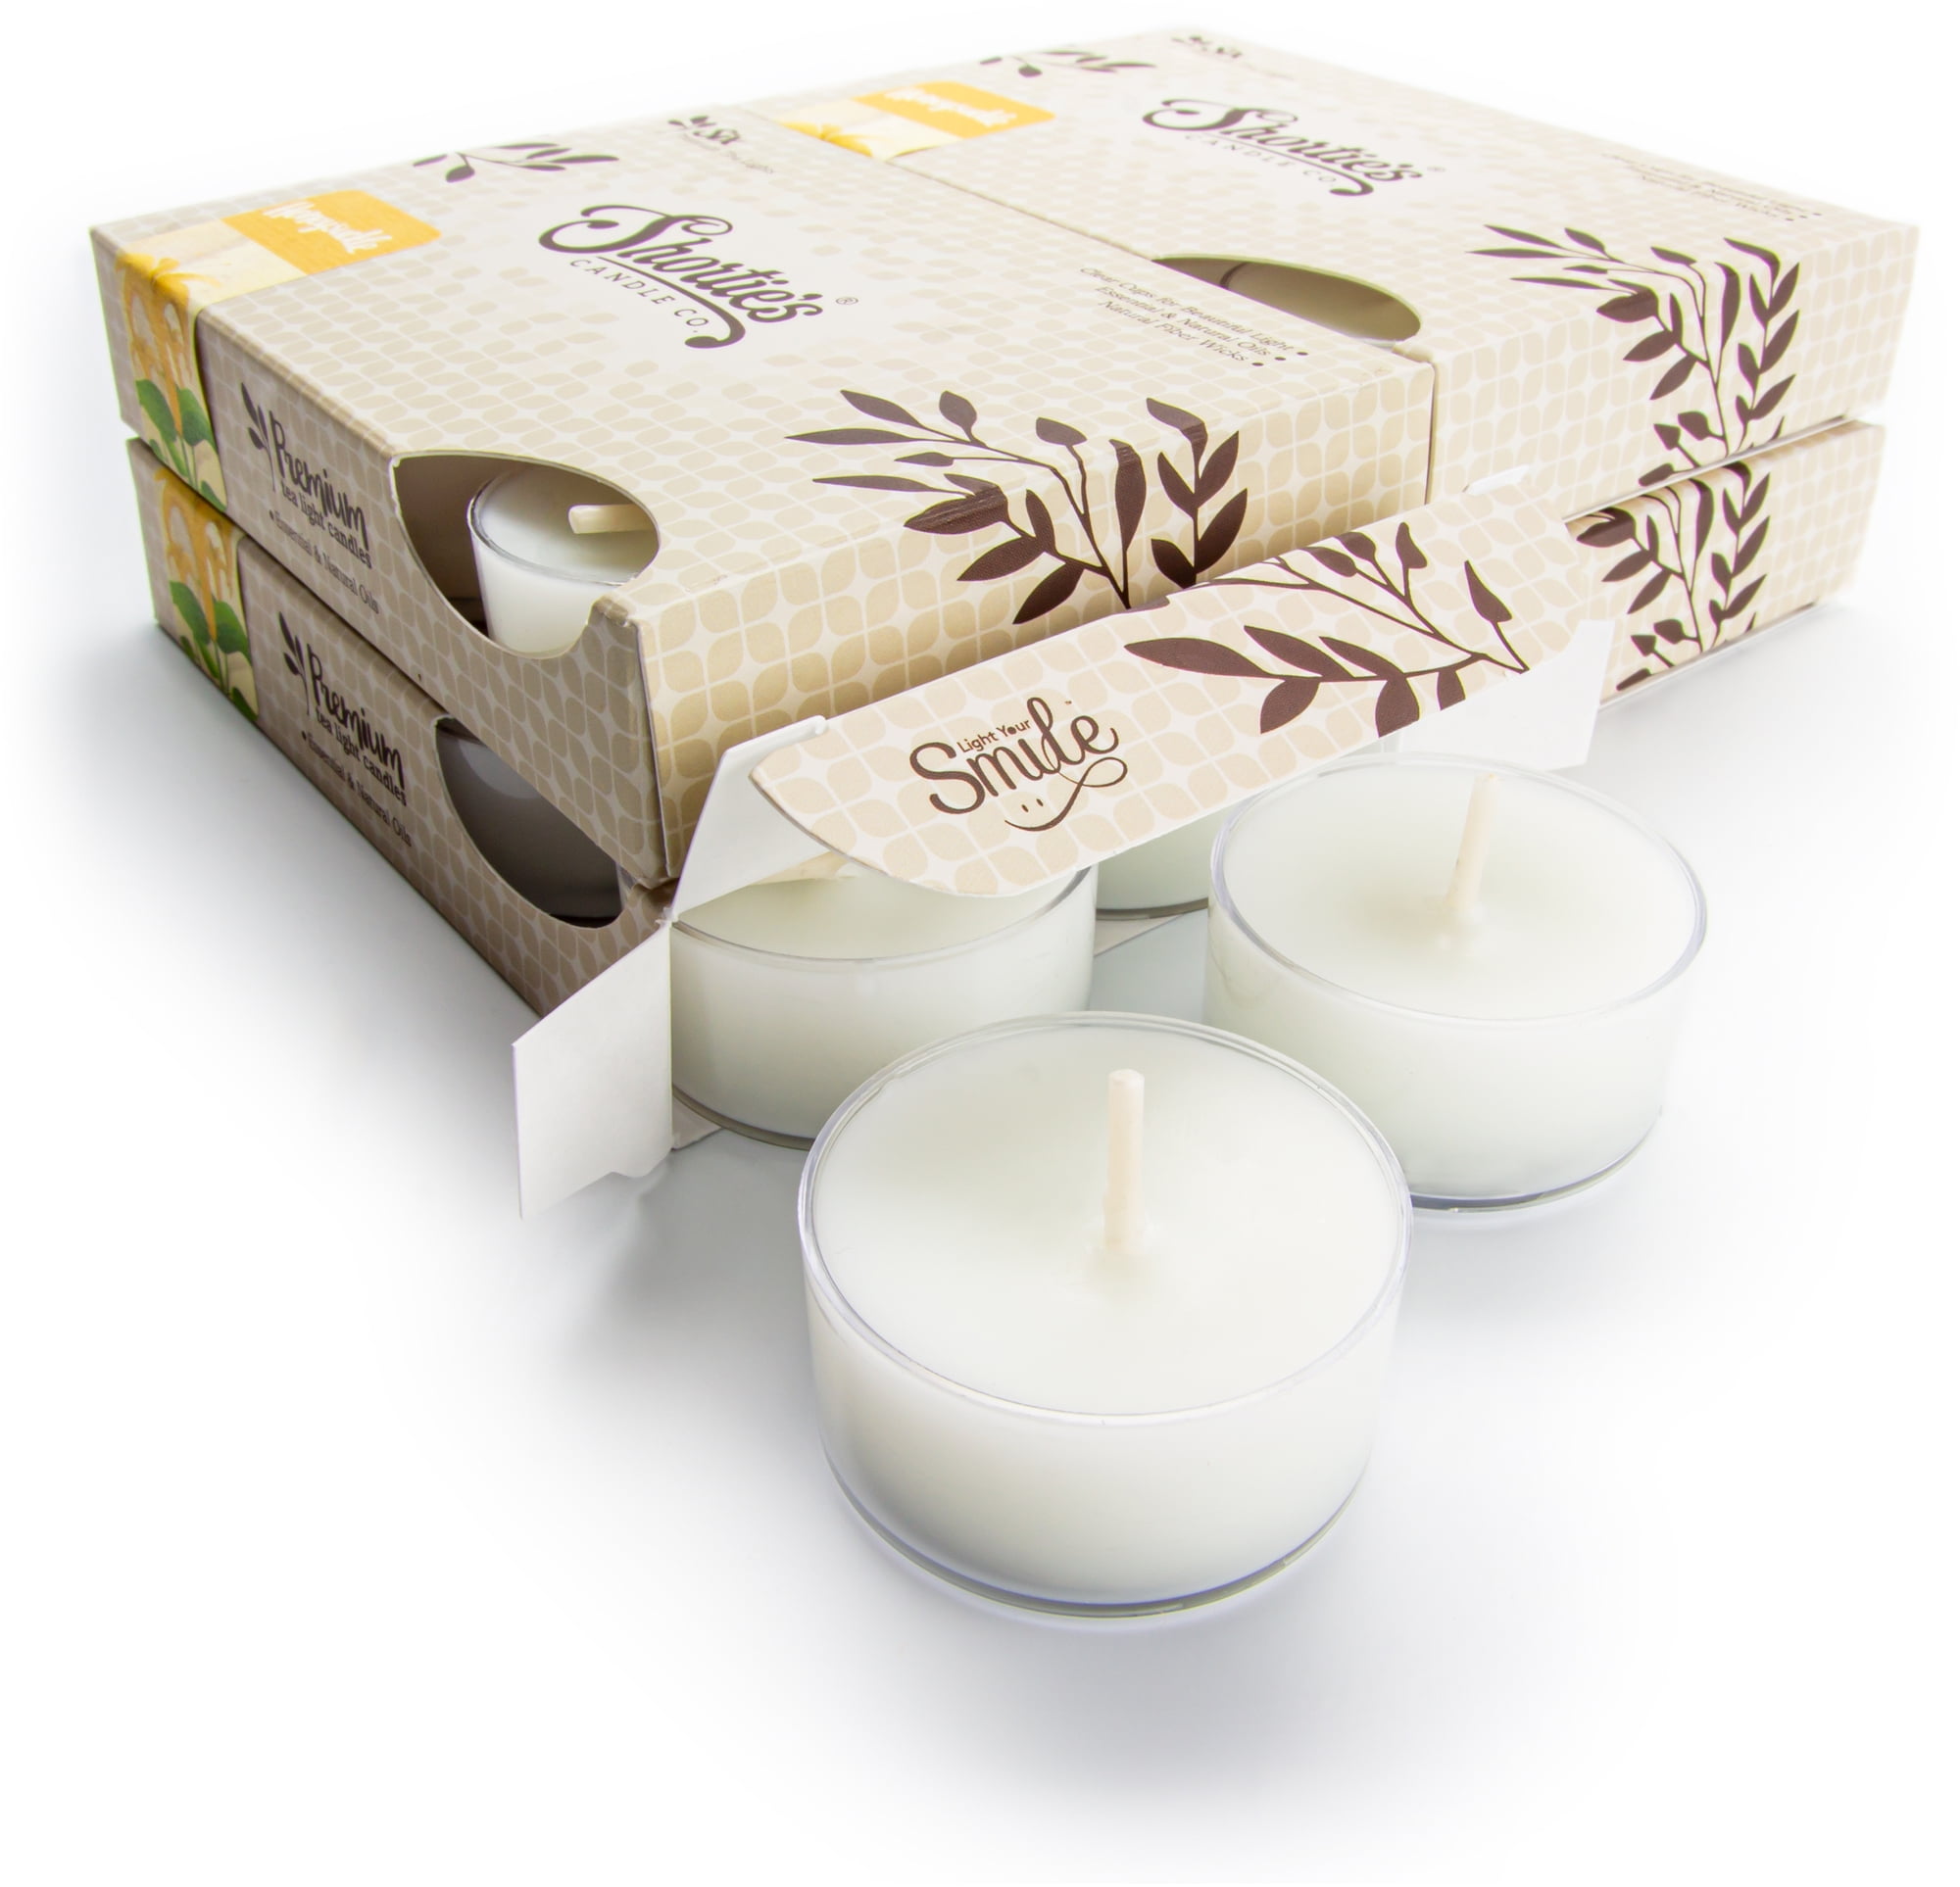 Simply Soothing, Milkhouse Candles Light Wick on New Product